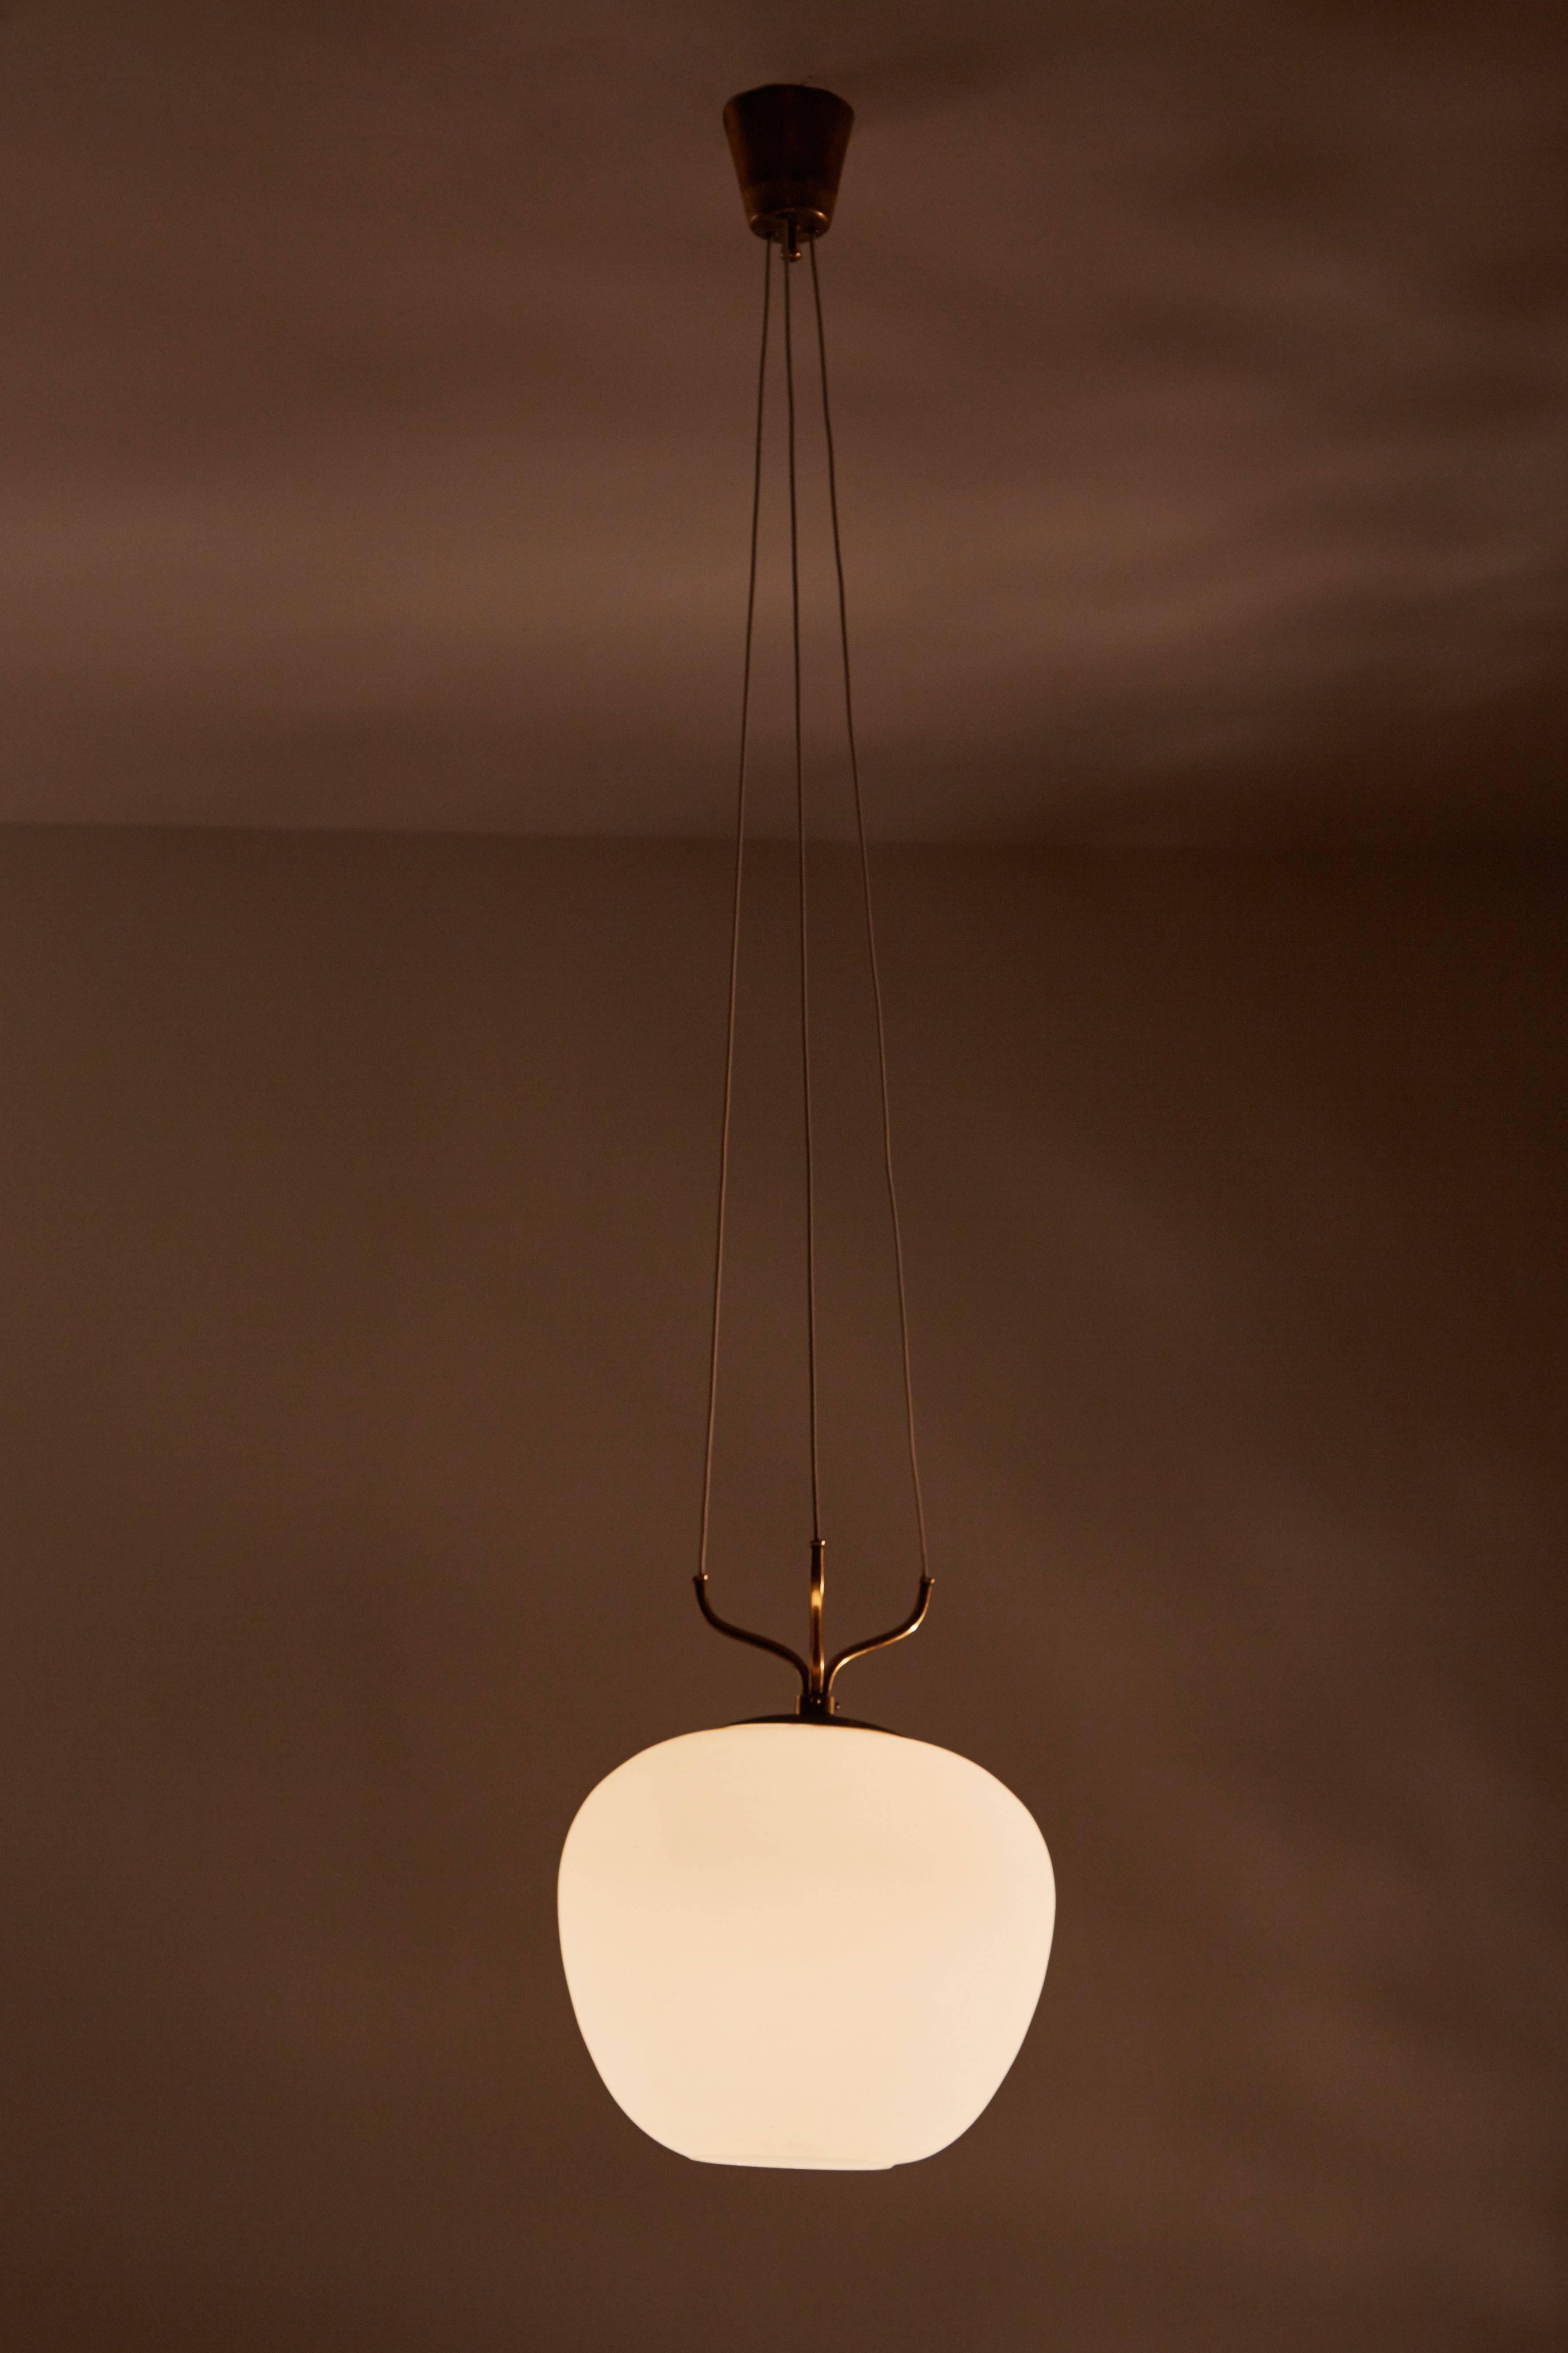 Suspension pendant with satin glass and brass hardware. Designed by Stilnovo in Italy, circa 1950s. Original canopy with custom backplate. Rewired for US junction box. Takes one E27 100w maximum bulb. 